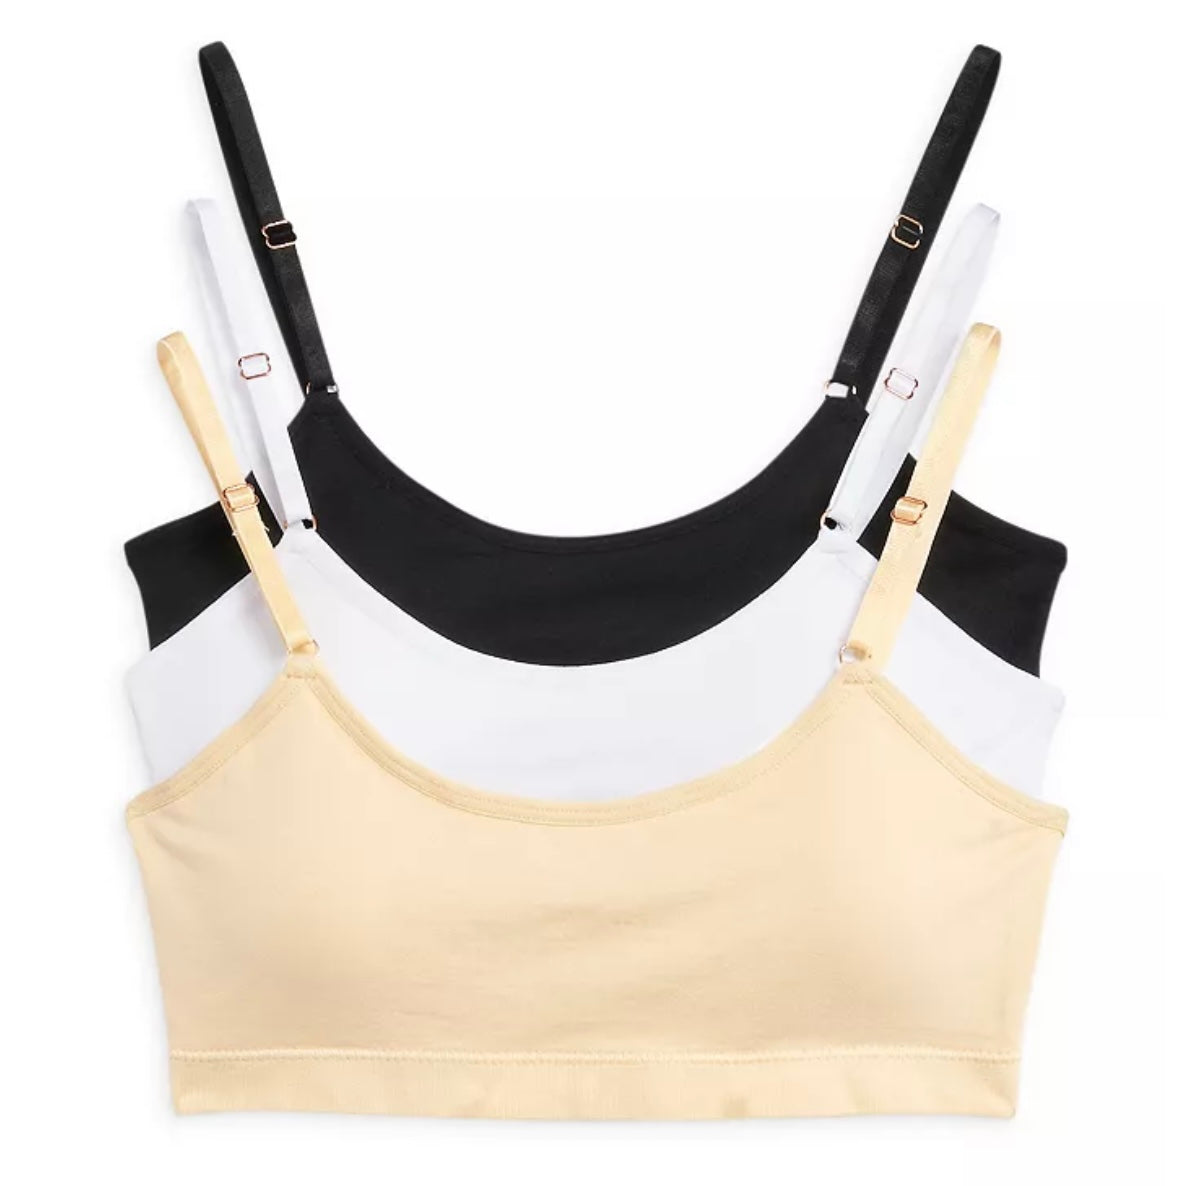 Pack Of 3 Women's Cami Crop Top Bralettes Sports Bra, Pack Of